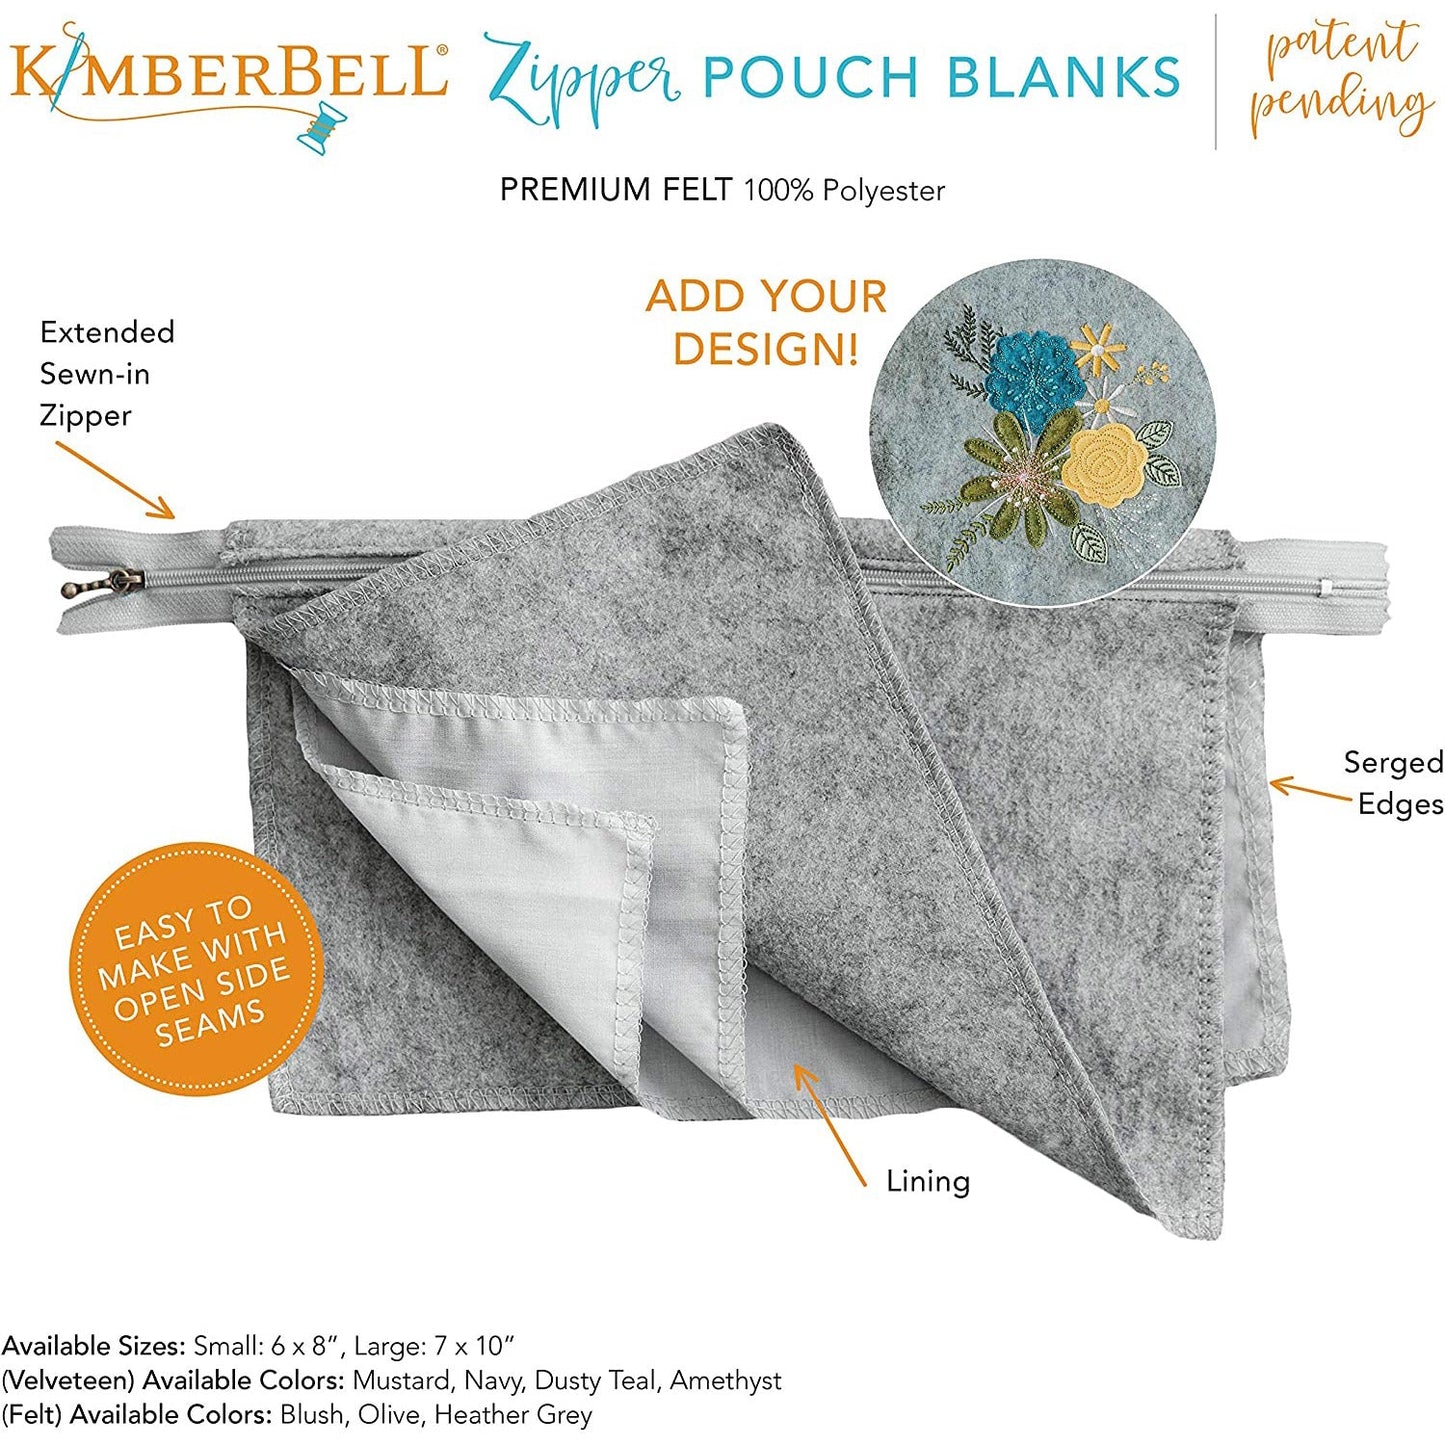 Zipper Pouch Blanks by Kimberbell have all the beauty and fun of a hand-made pouch, without all of the fuss. The patent pending design features an open side seam to make adding your favorite design easier than ever.  Available in two sizes and your choice of 3 colors of felt or 4 colors of velveteen.